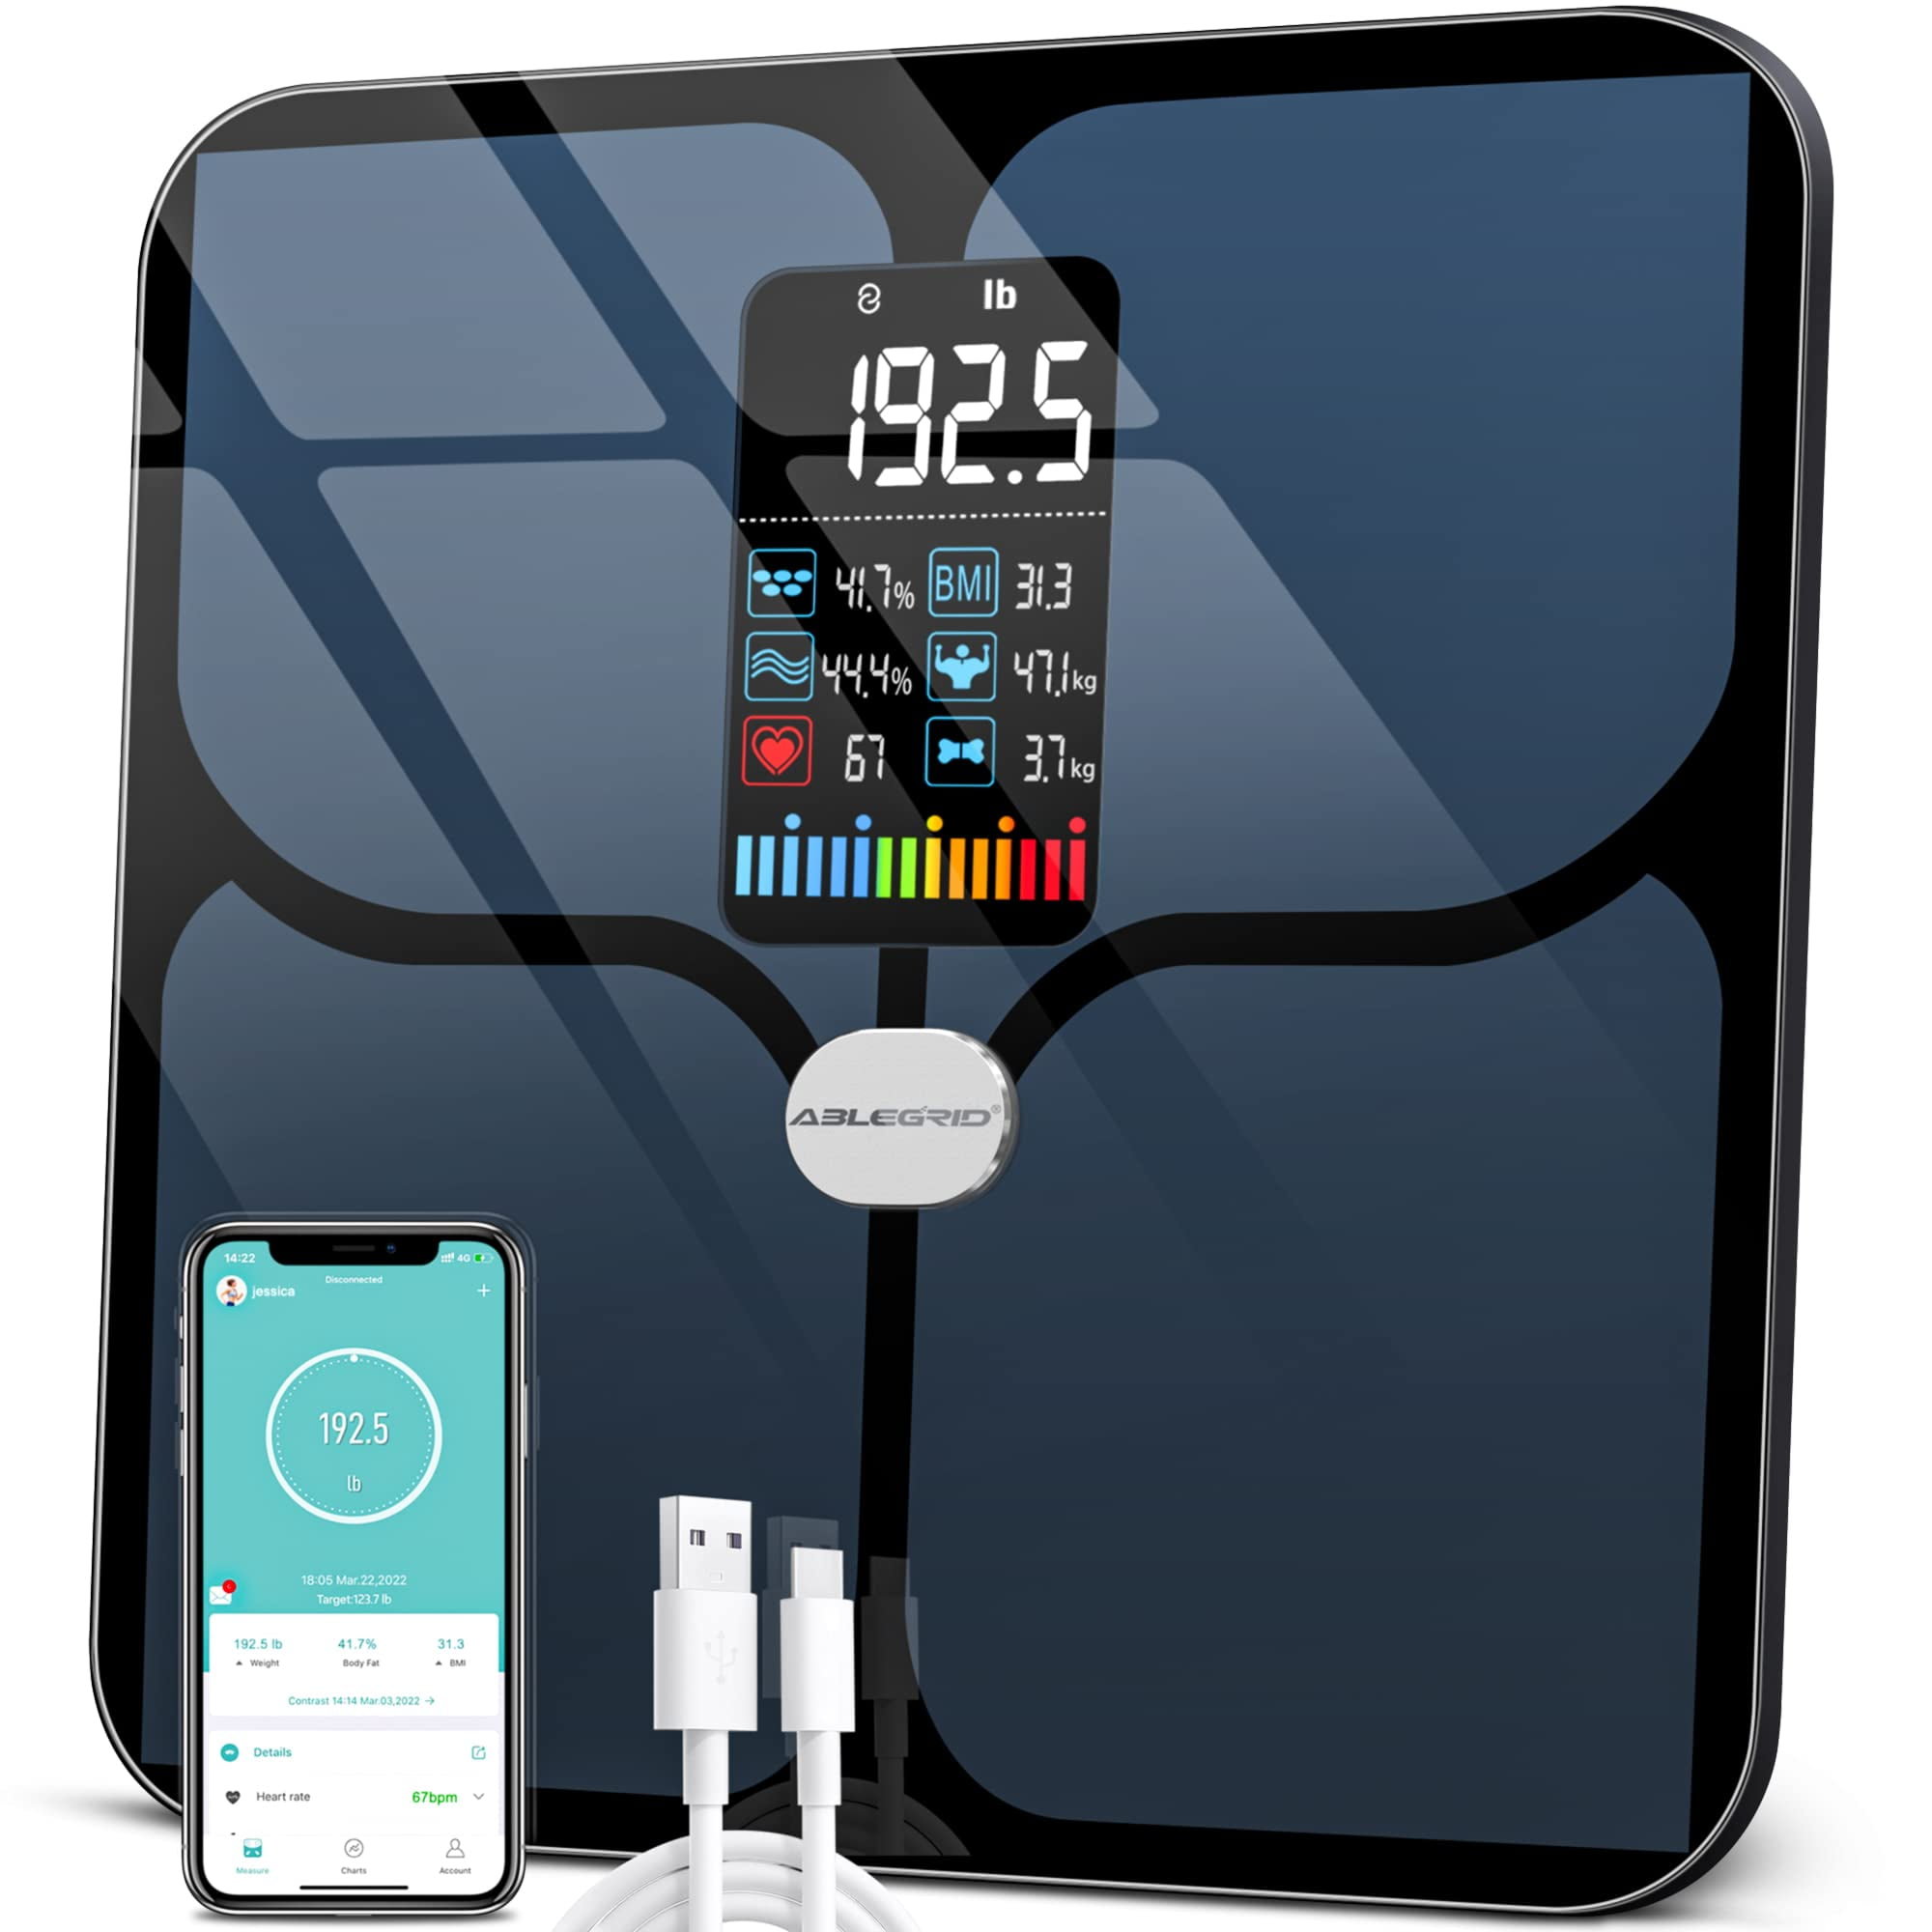 Echainstar Weighing Scale Body Fat Scale Bluetooth BMI Body Scales Sma –  iRonsnow